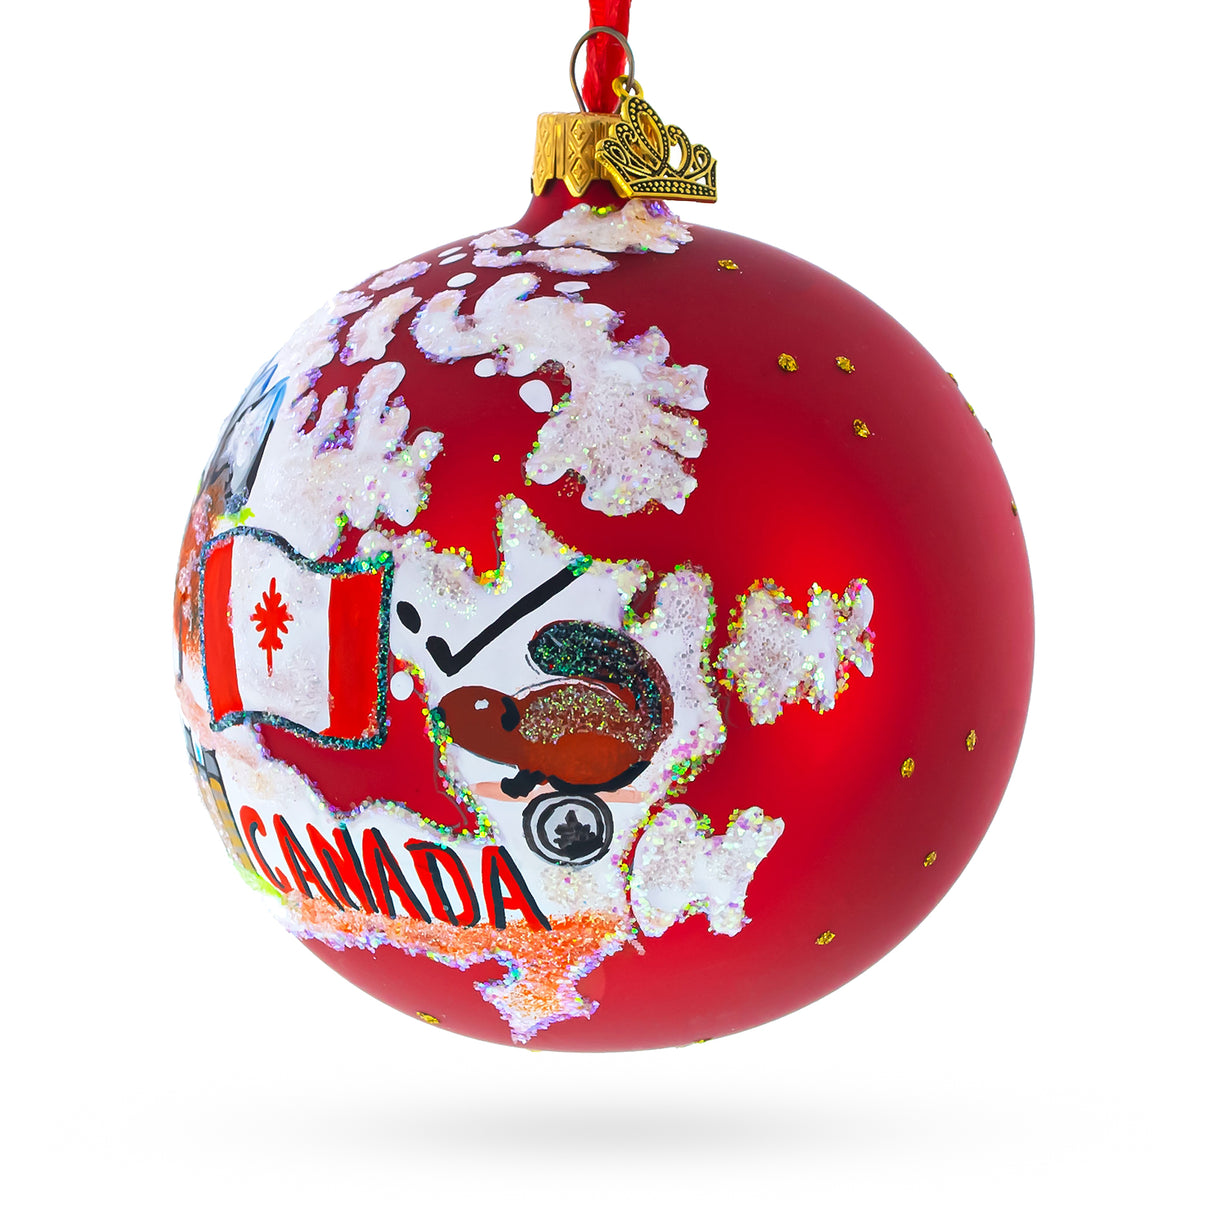 Buy Christmas Ornaments Travel North America Canada by BestPysanky Online Gift Ship